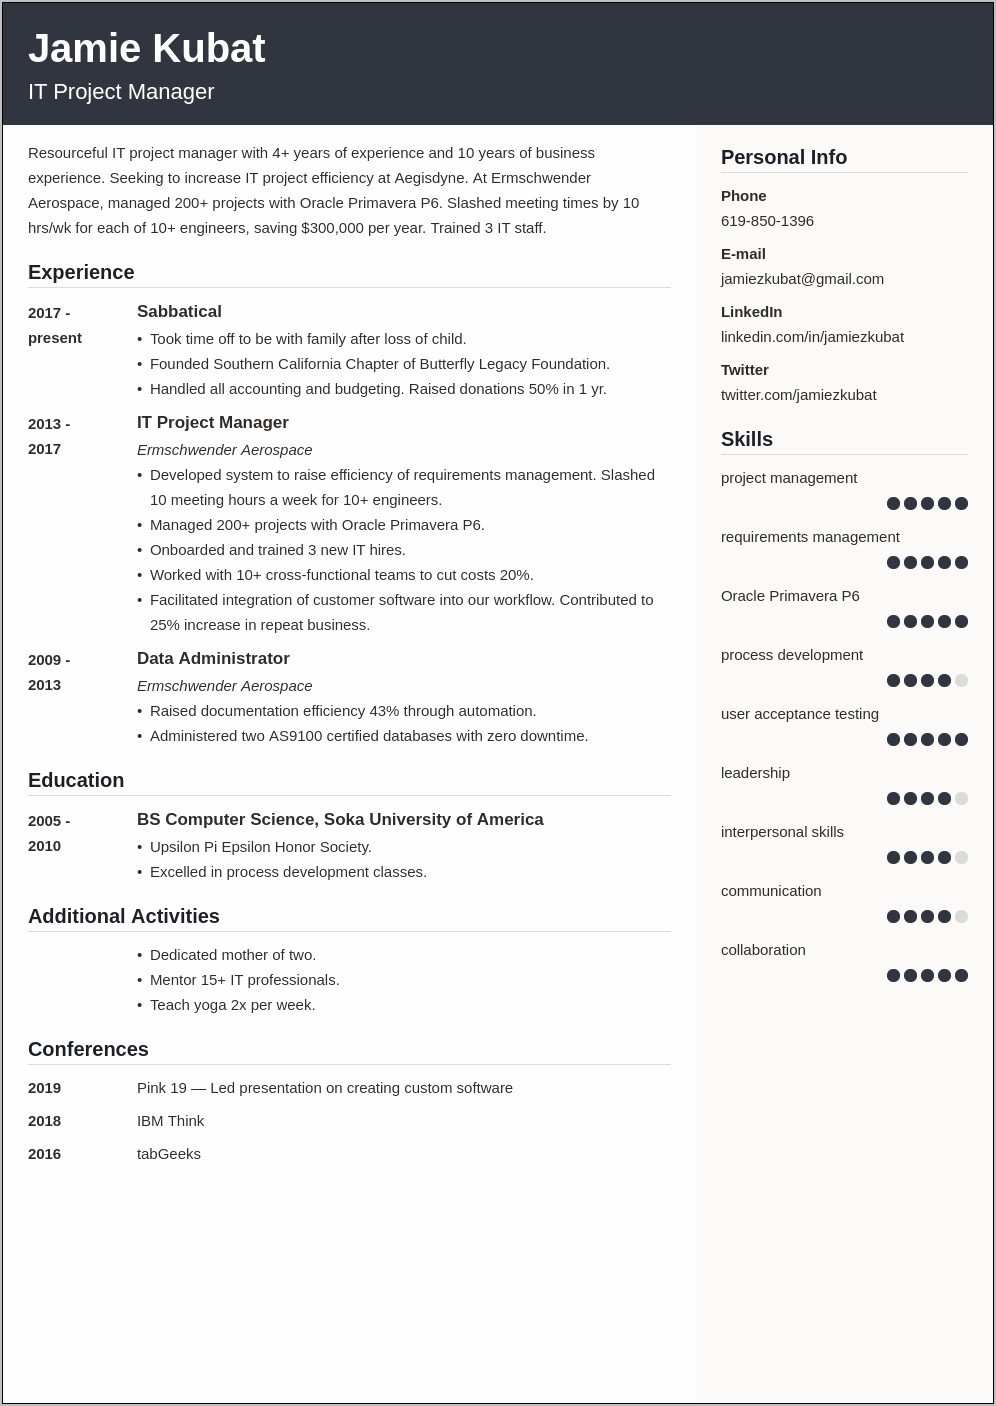 Examples Of Gaps In Employment On A Resume